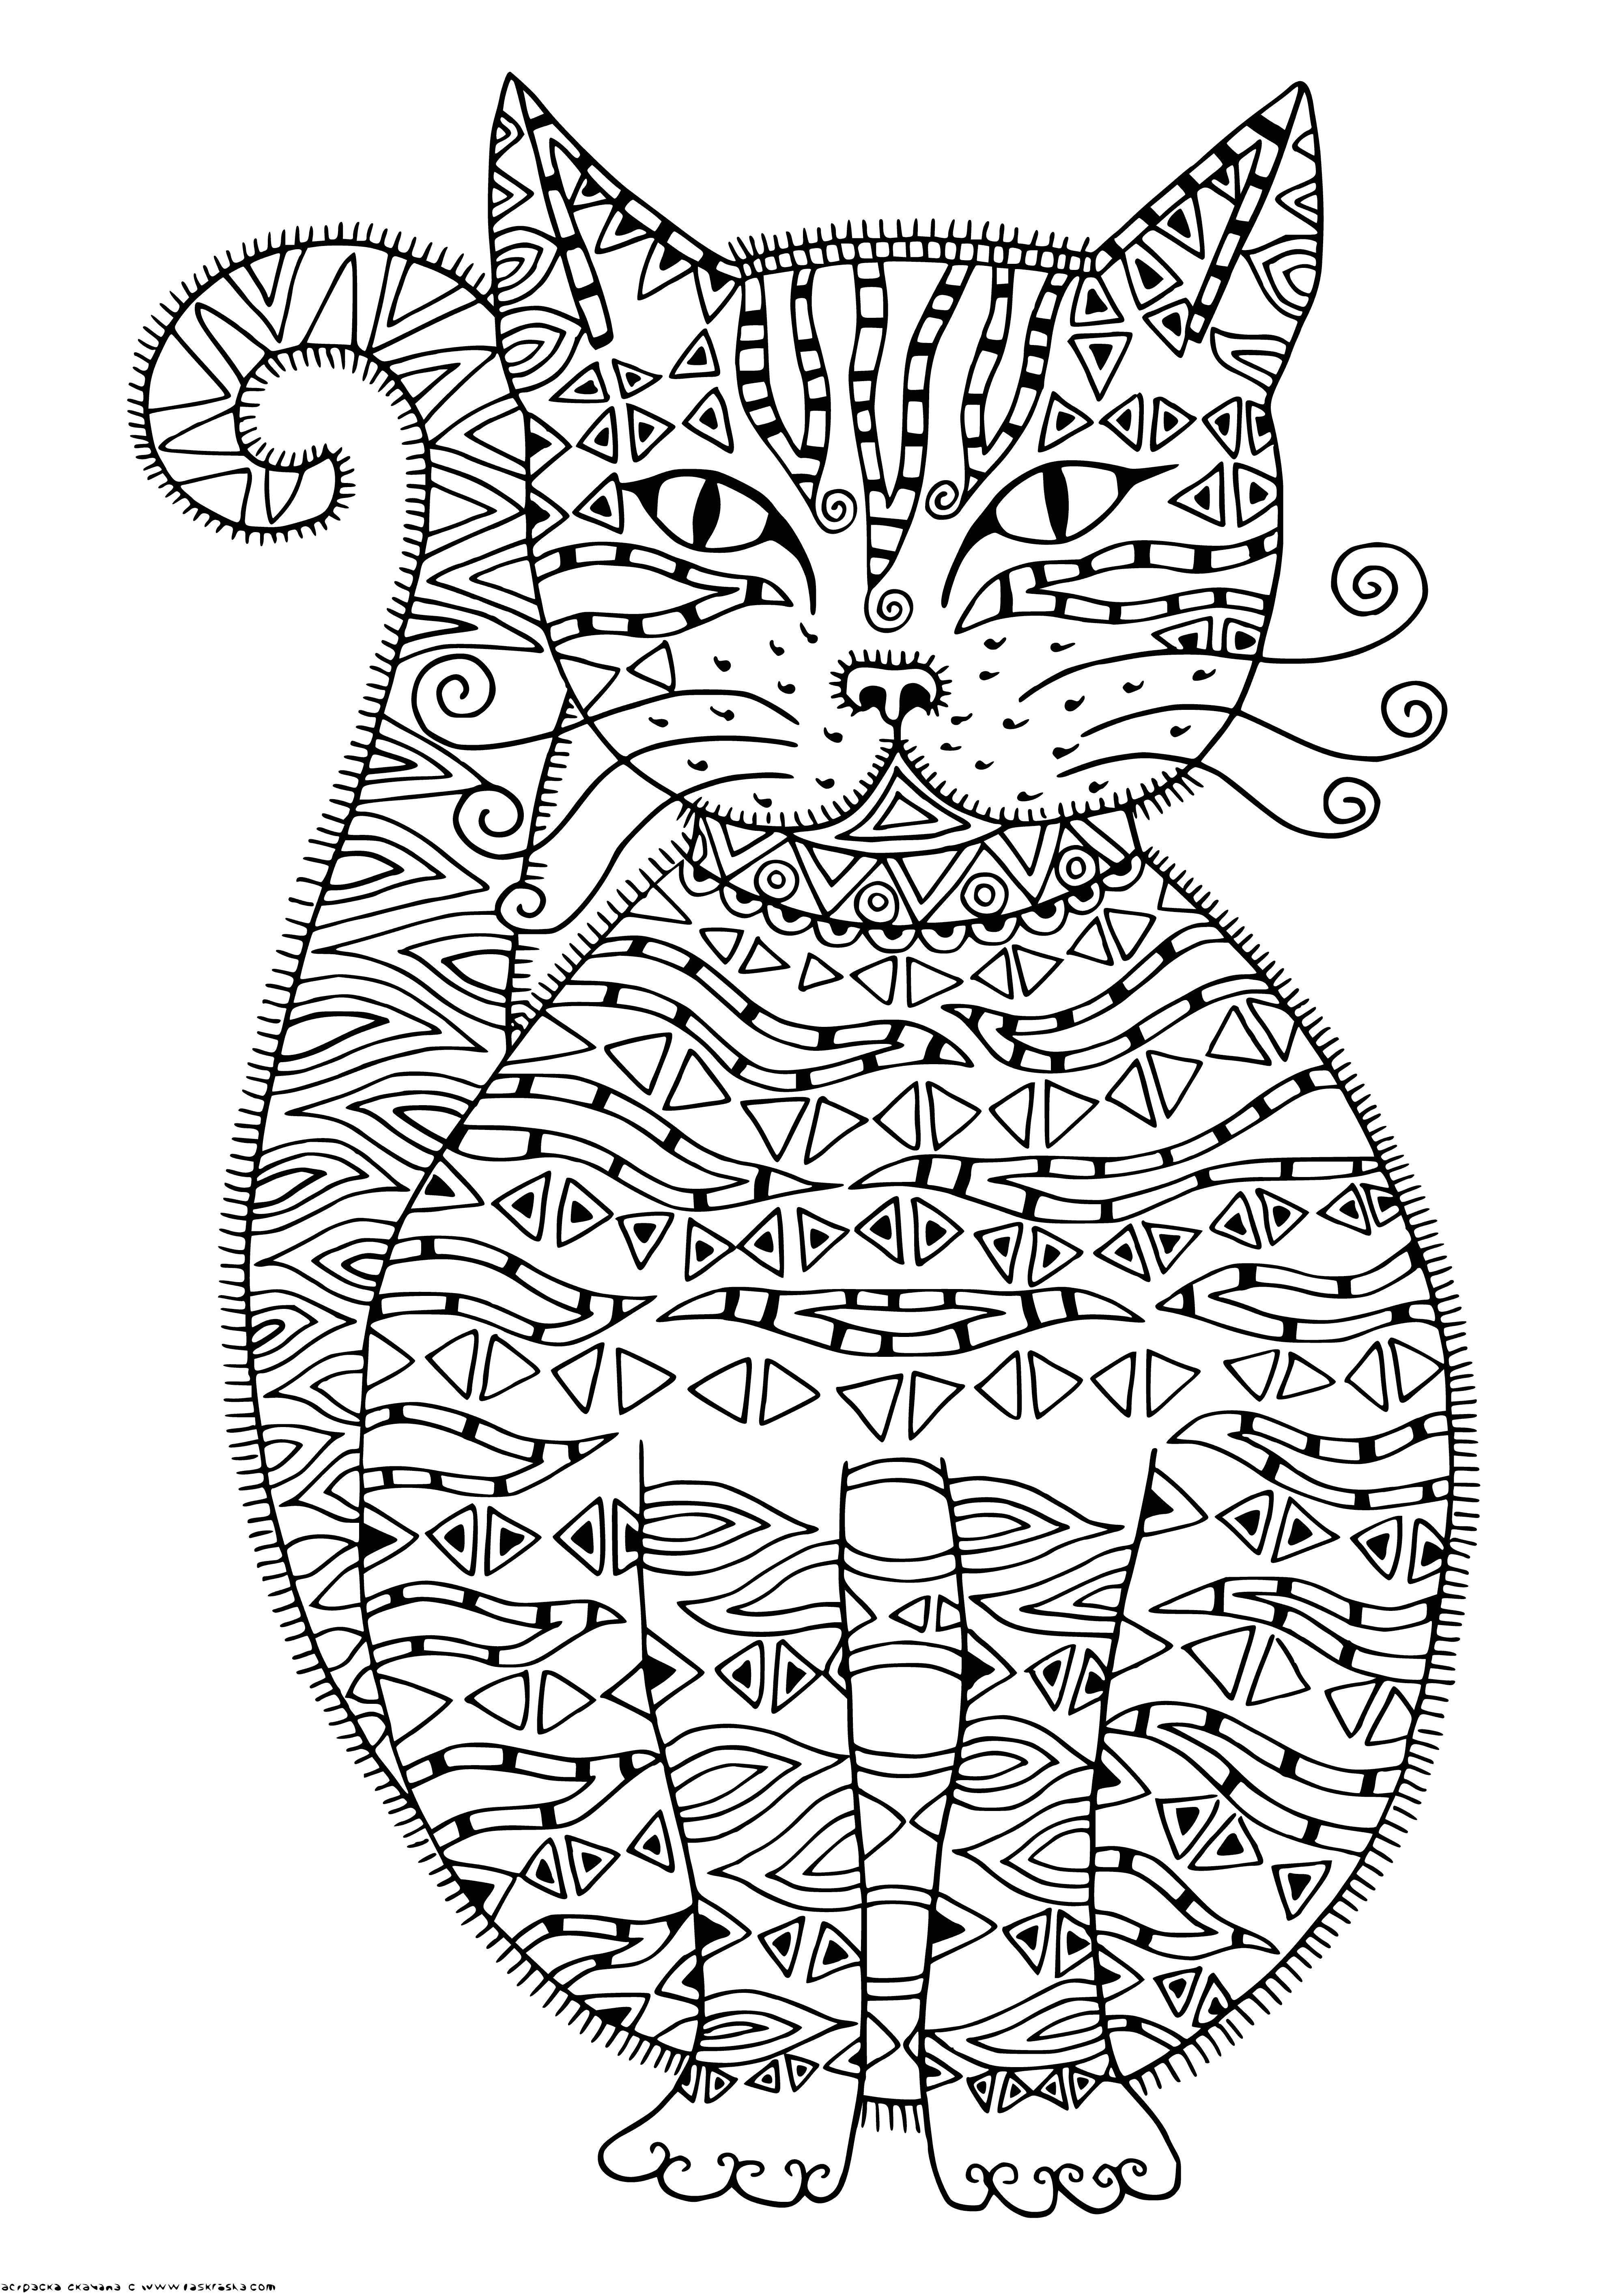 Kitty coloring page